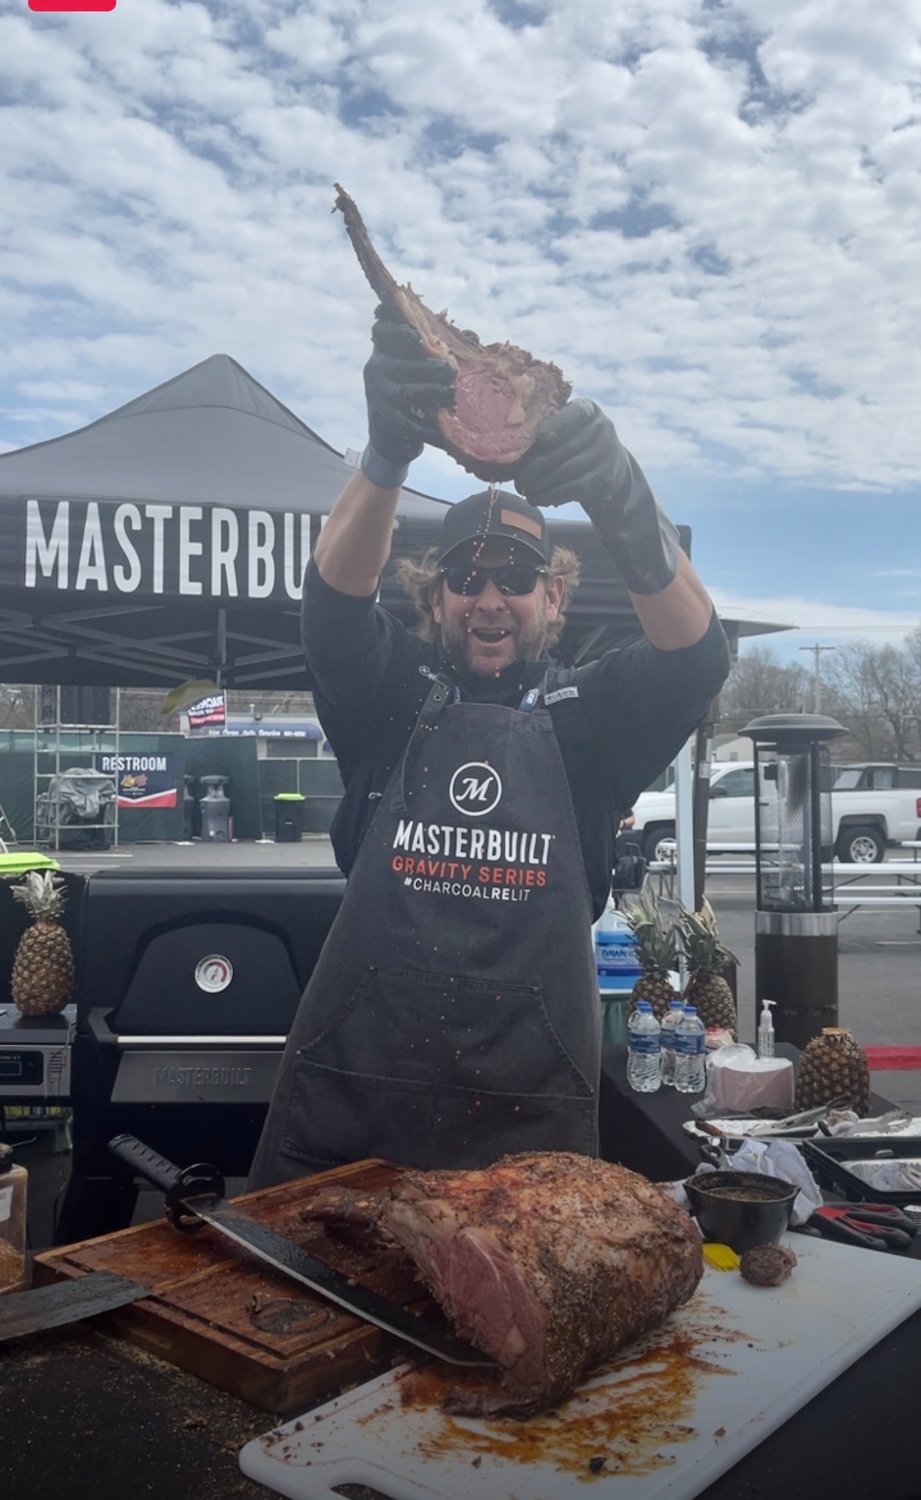 John McLemore Sr. held the title of Masterbuilt CEO for nearly four decades and still acts as a spokesman… and smokesman for the brand.